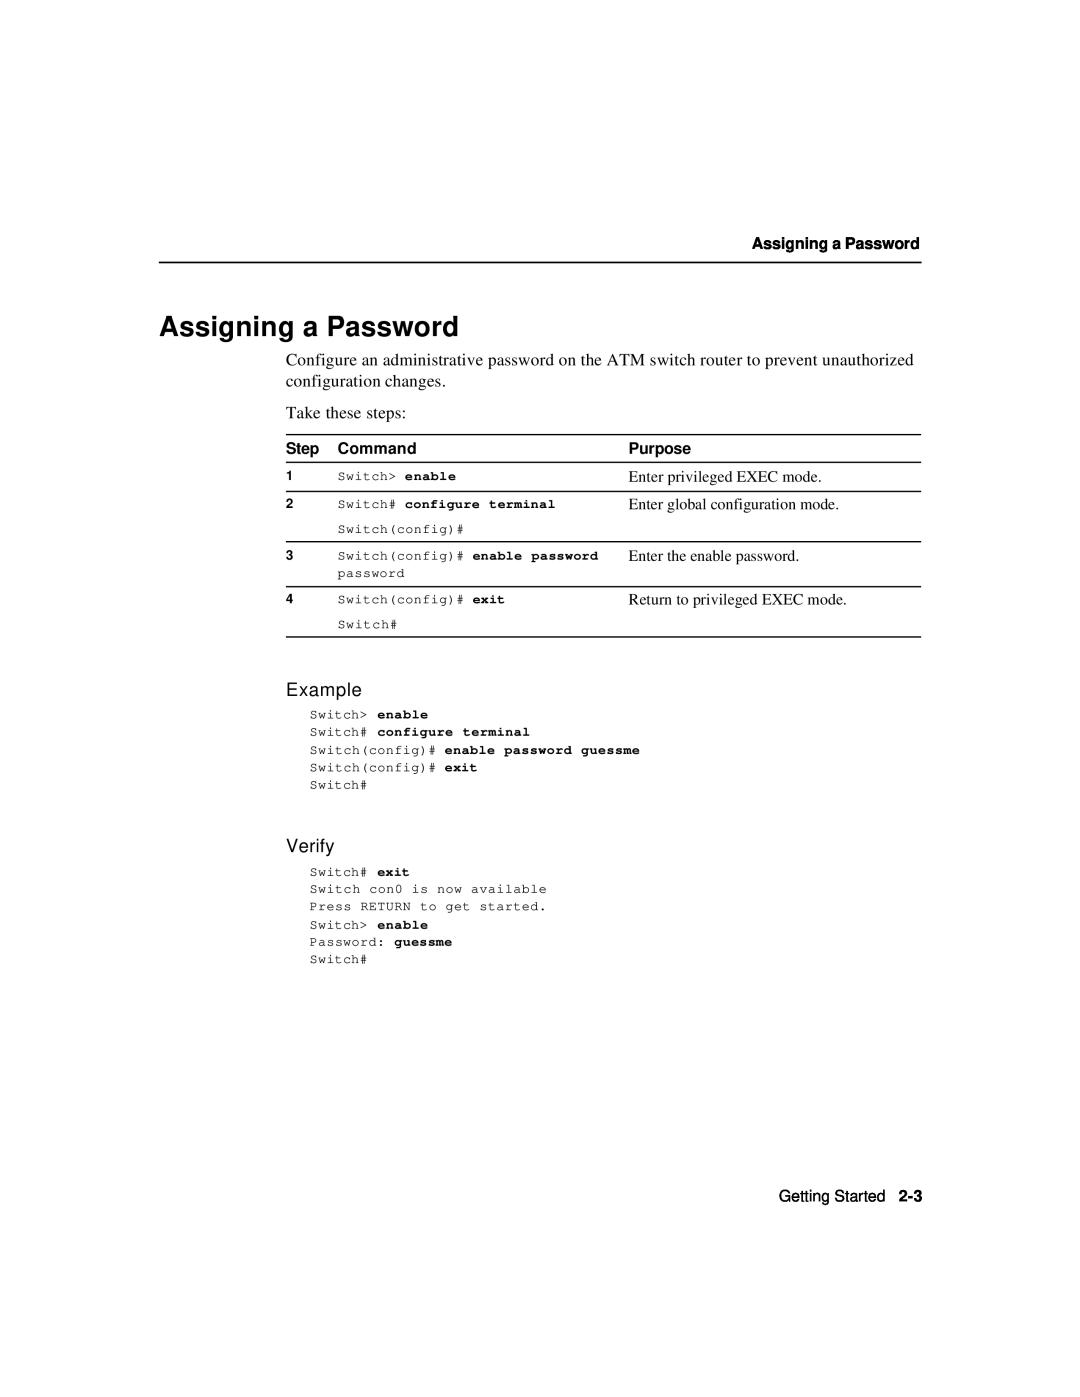 Cisco Systems 78-6897-01 manual Assigning a Password, Example, Verify, Step Command, Purpose, Getting Started 